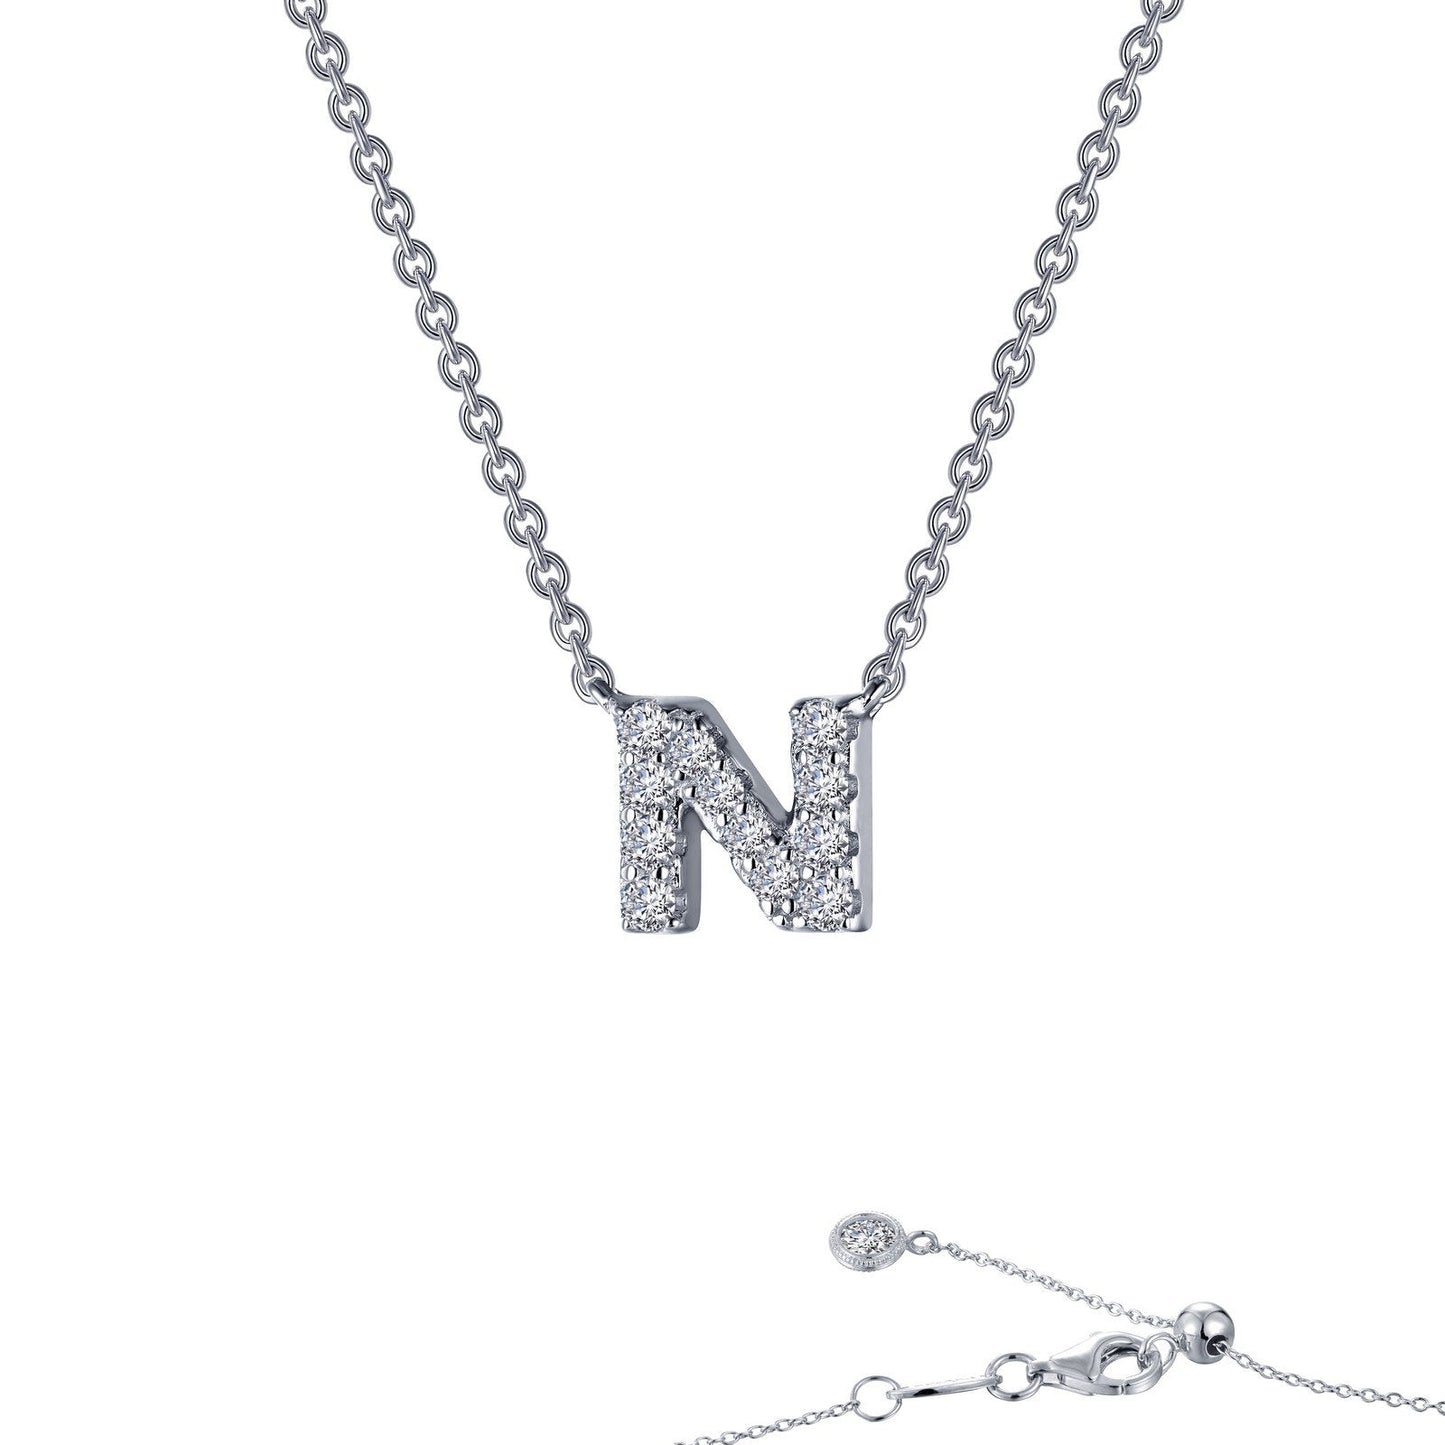 Lafonn Letter N Pendant Necklace Simulated Diamond NECKLACES Platinum 0.41 CTS Approx. 6mm (H) x 6.5mm (W)